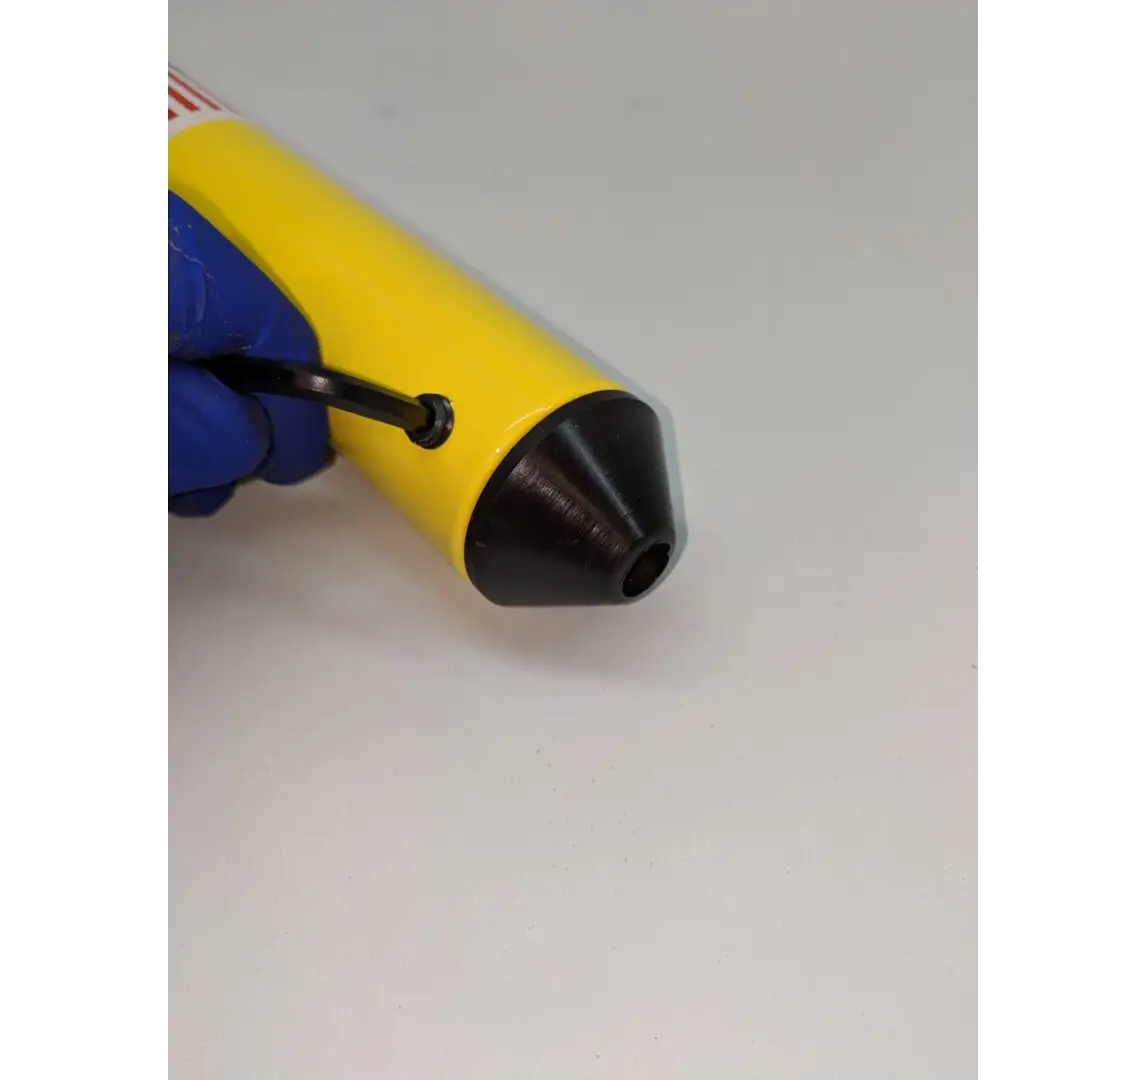 A yellow and black object is being held by a blue tool.